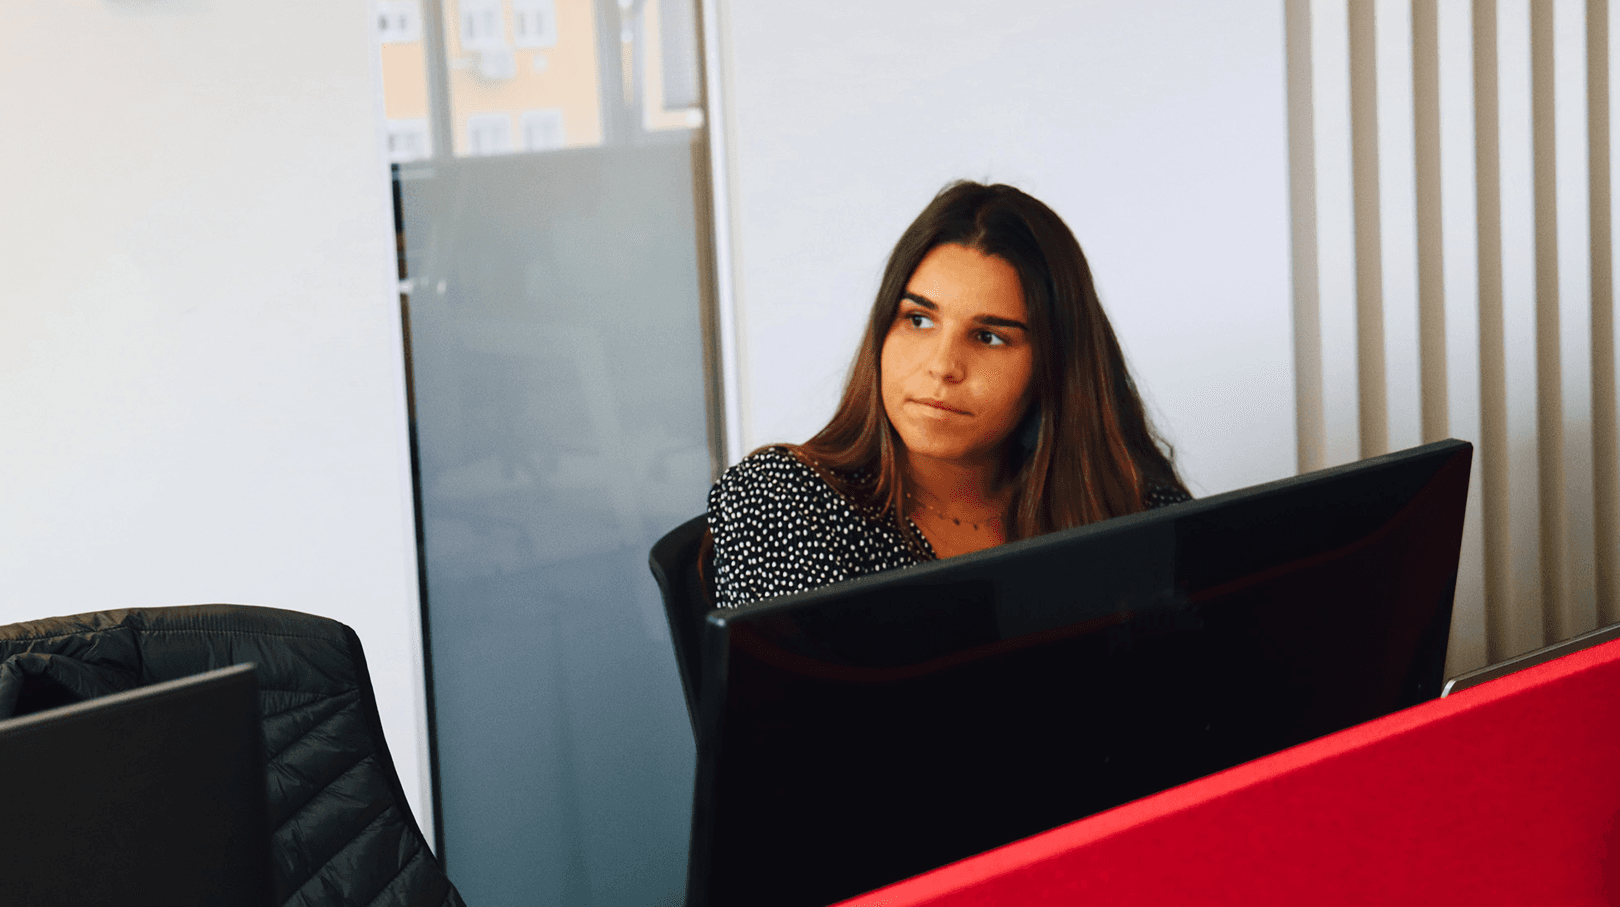 picture of a young woman with a computer screen in front of her, looking to the right, with a focused and interested look. The woman is brunette and is dressed in black. In the background we can see the office in white and red tones.